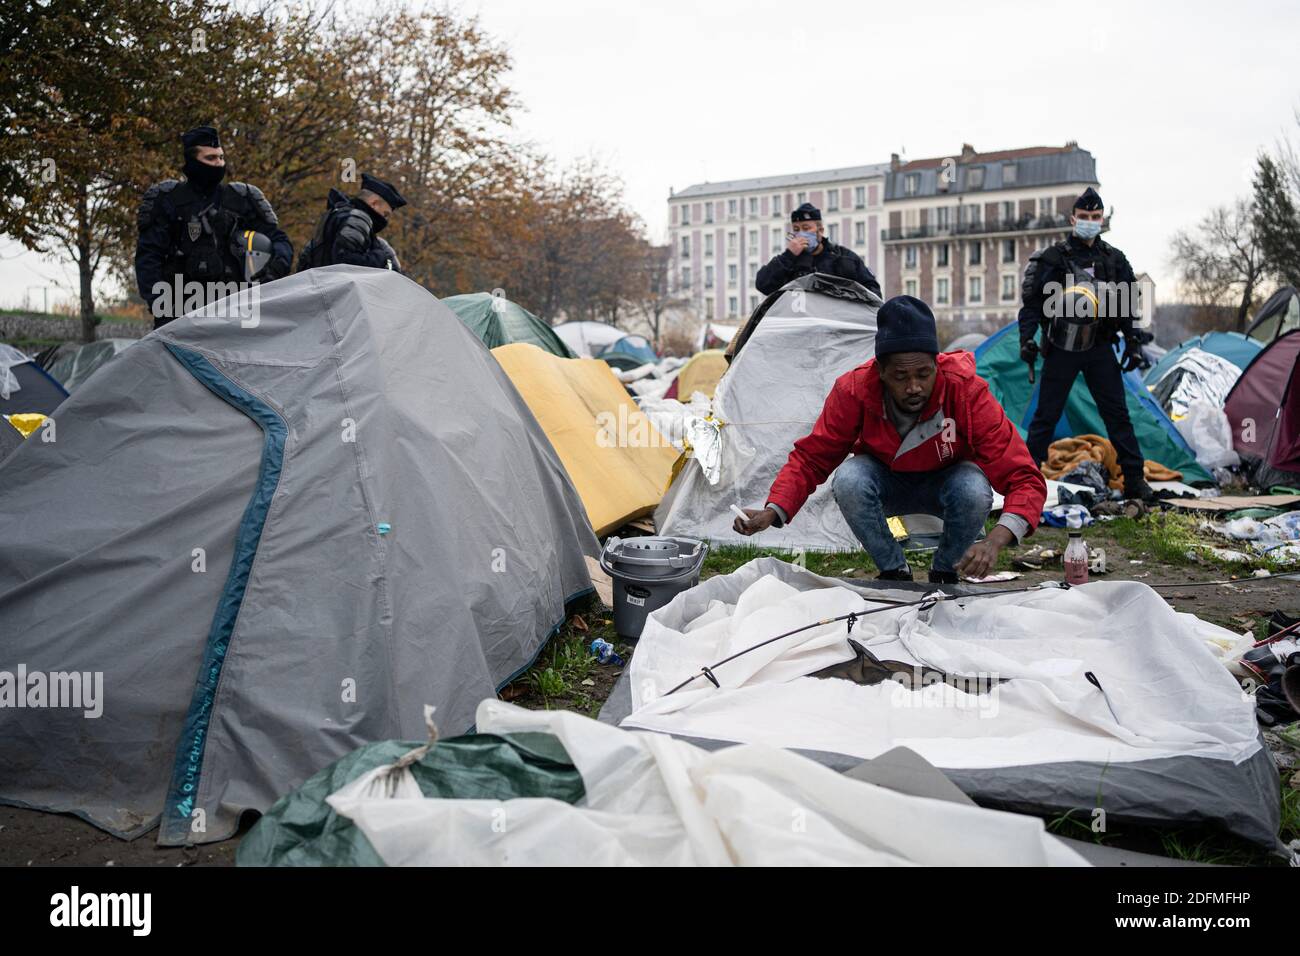 The Porte de Paris migrant camp, which housed nearly 2,500 people, is  dismantled and its occupants temporarily relocated. Paris, France, November  17, 2020. Photo by Florent Bardos/ABACAPRESS.COM Stock Photo - Alamy